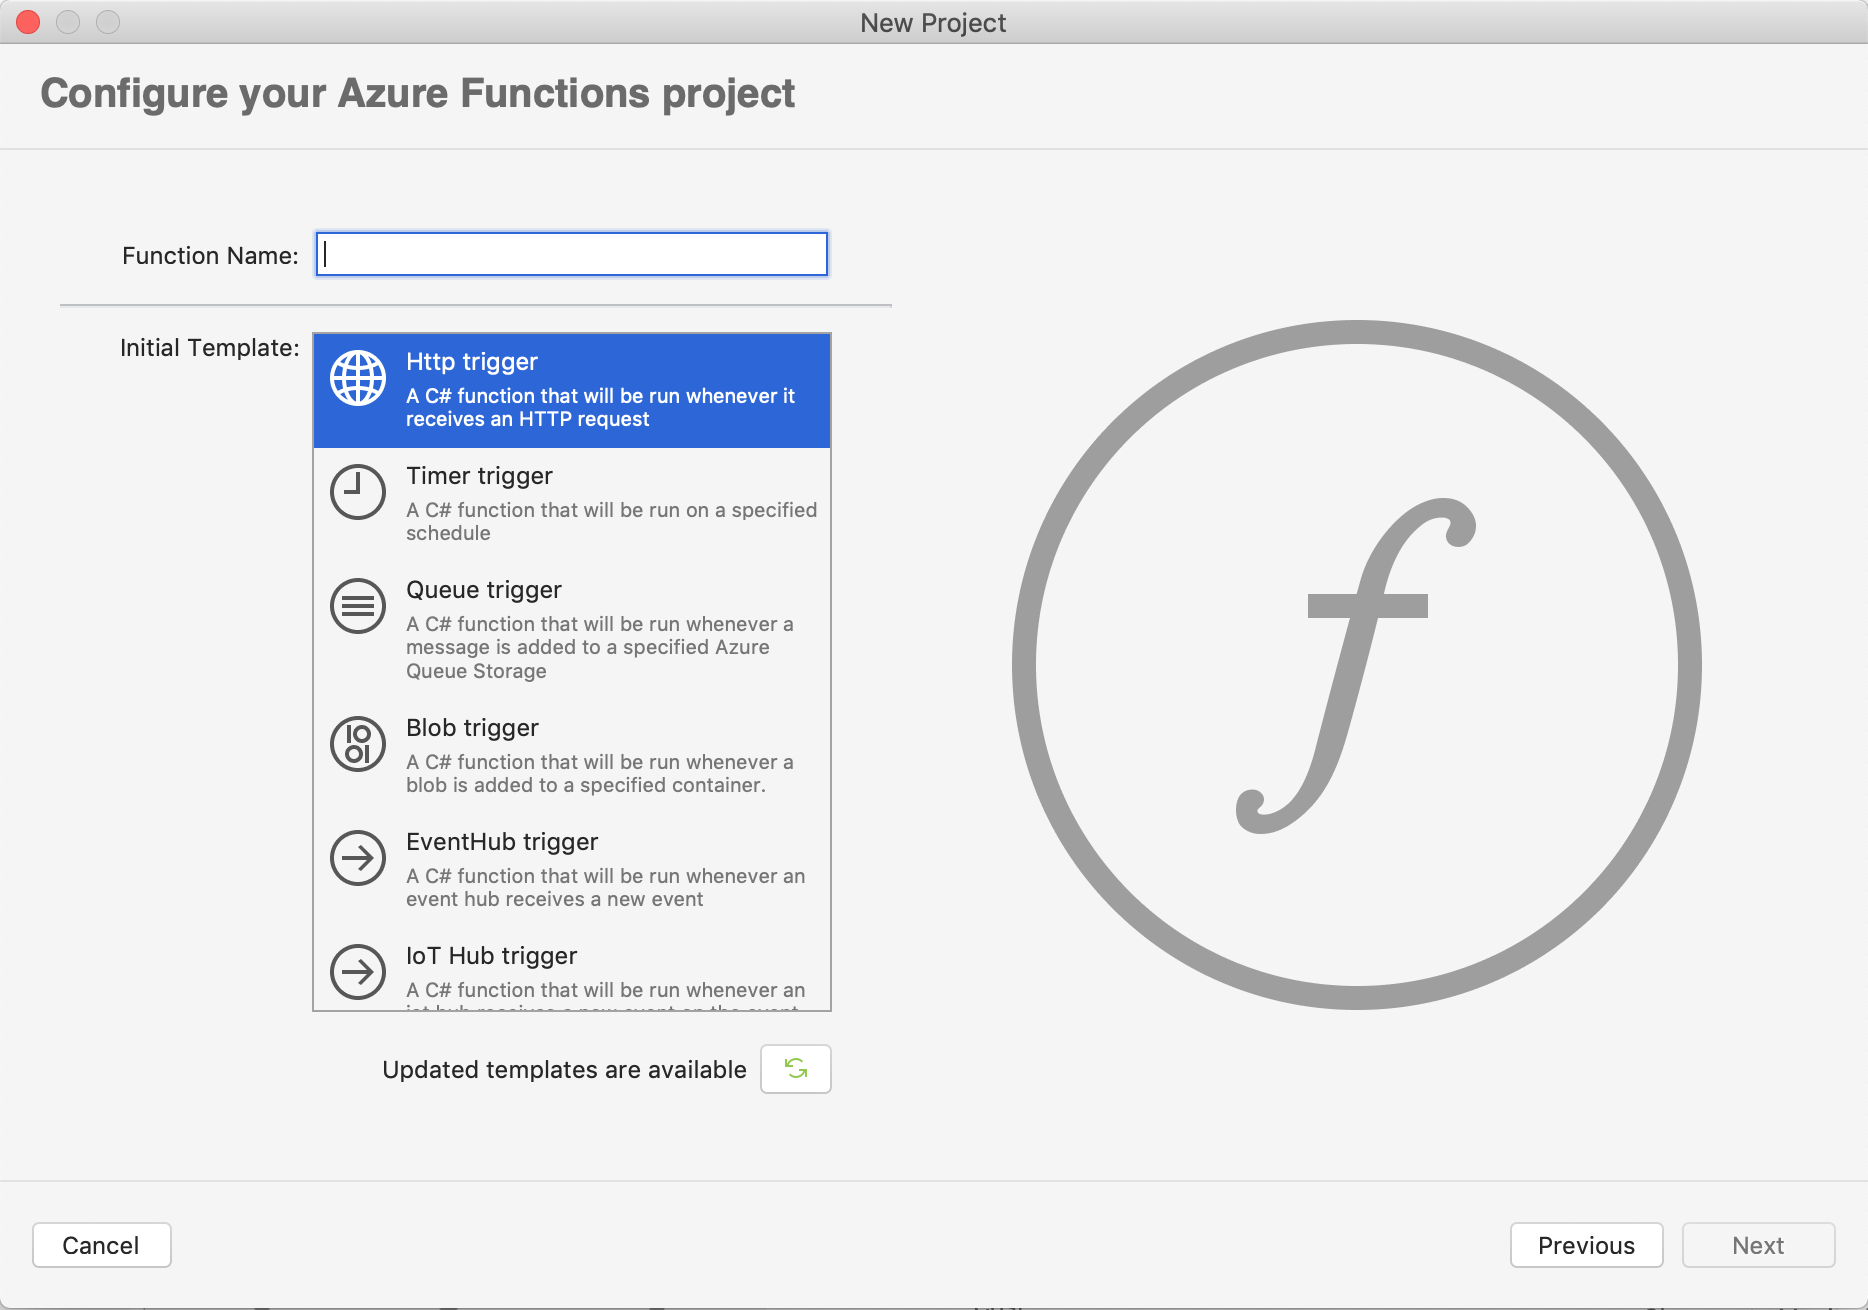 Update Azure Fucntions templates